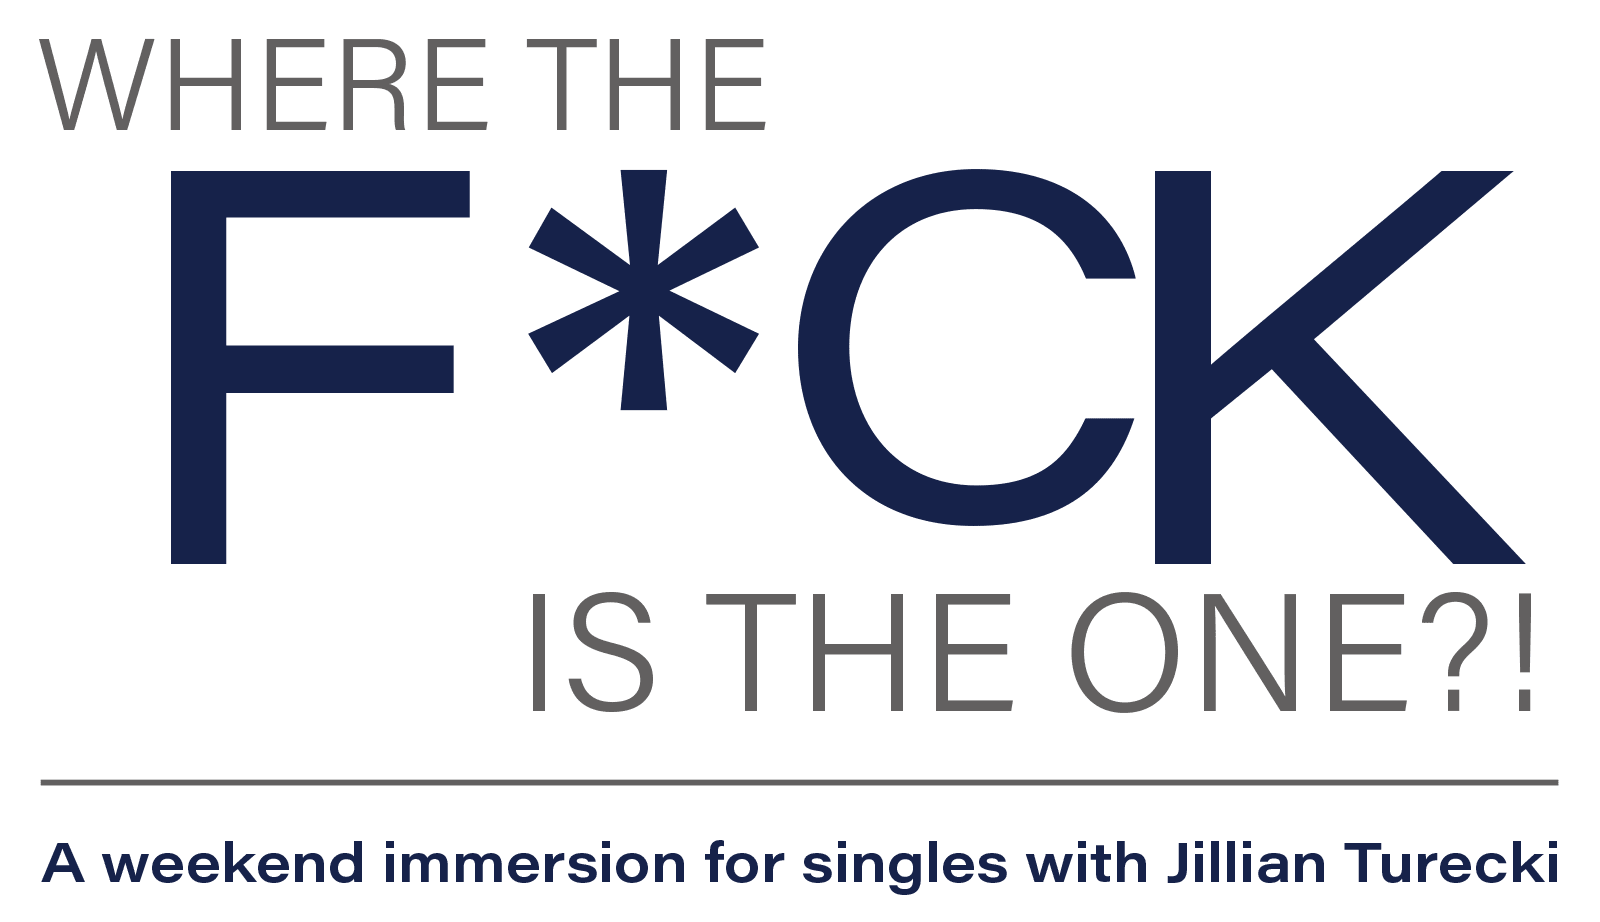 A weekend immersion for singles with Jillian Turecki